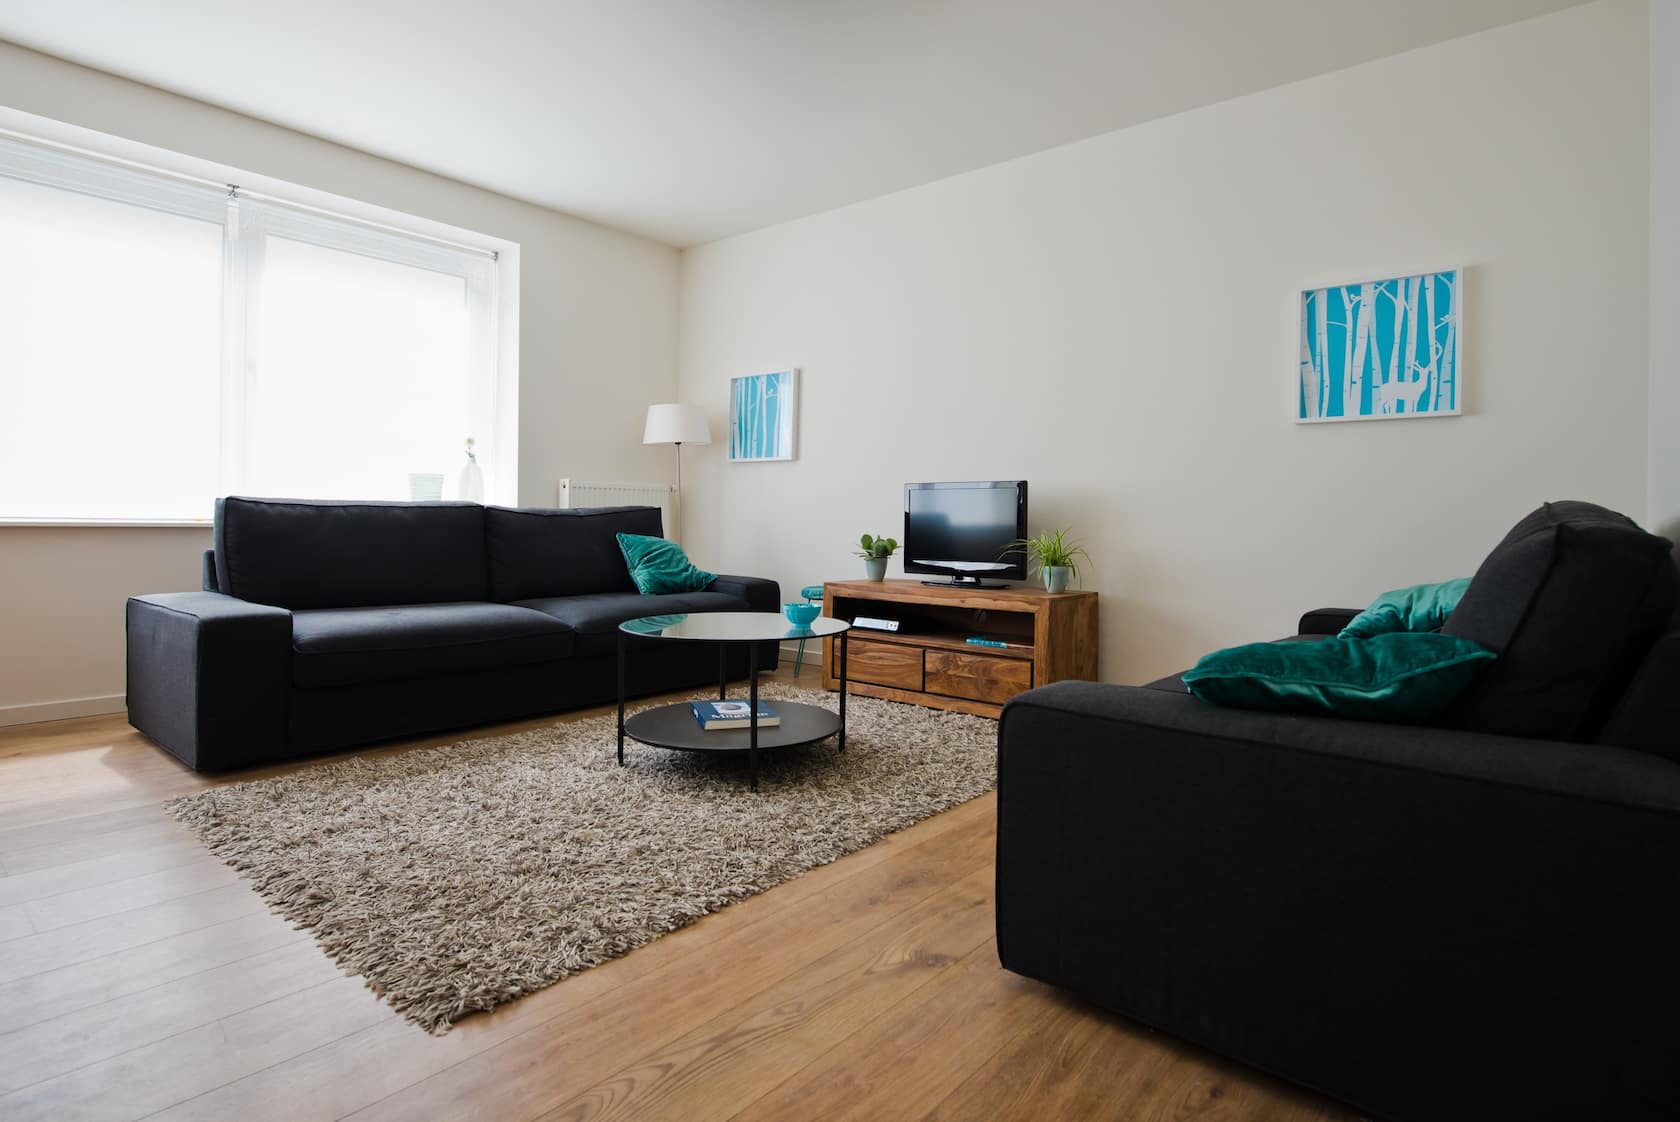 Rental apartment in Ghent